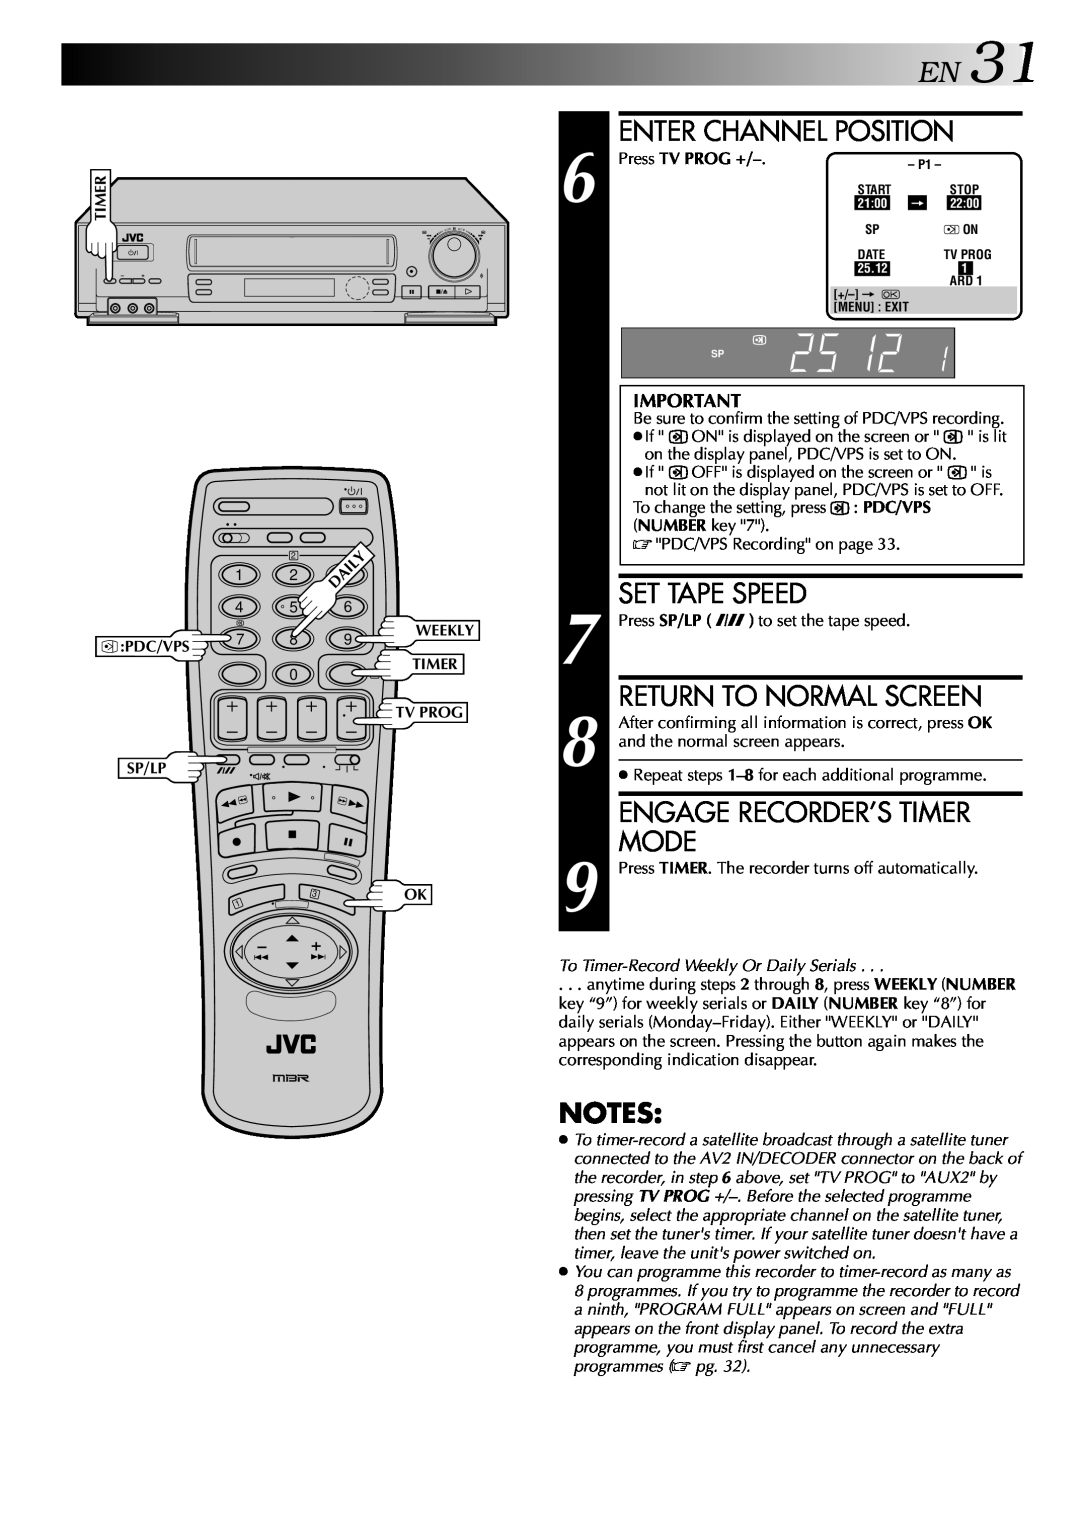 JVC HR-DD848E specifications Enter Channel Position, Set Tape Speed, Engage Recorder’S Timer Mode, Return To Normal Screen 